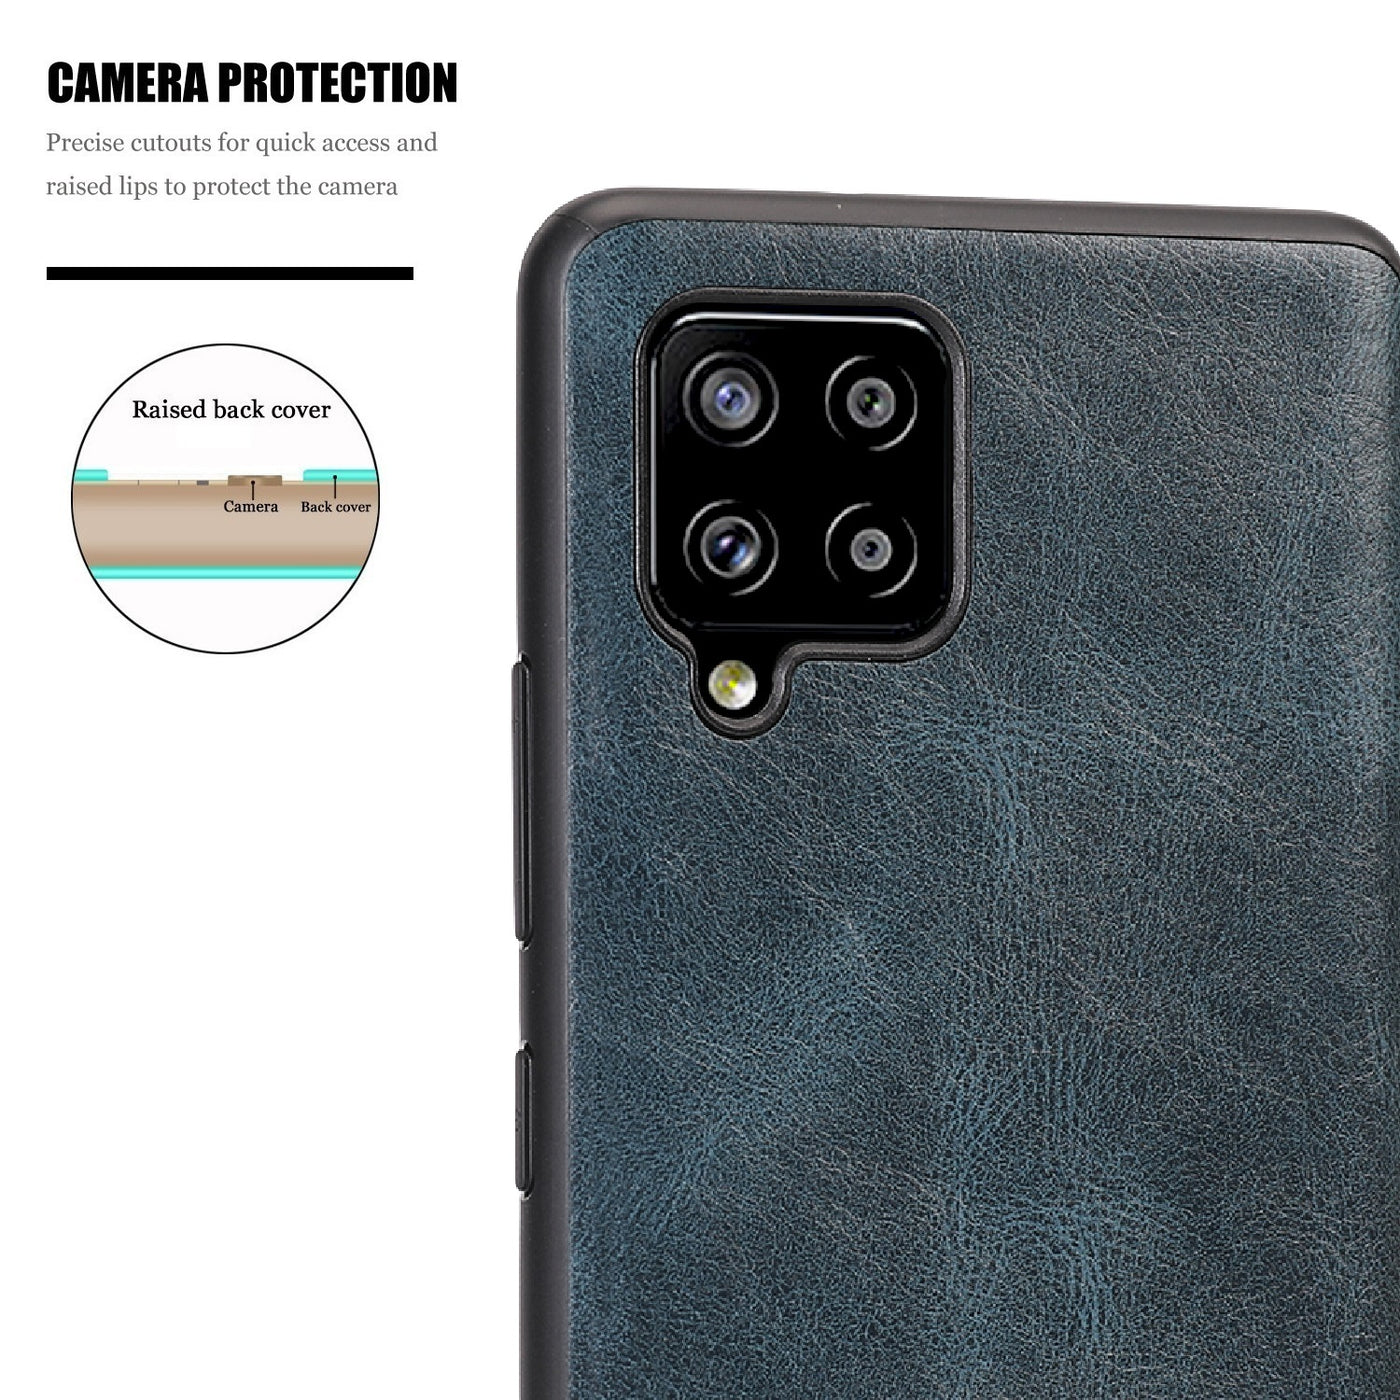 Samsung Galaxy F62 raised edges to provide full protection